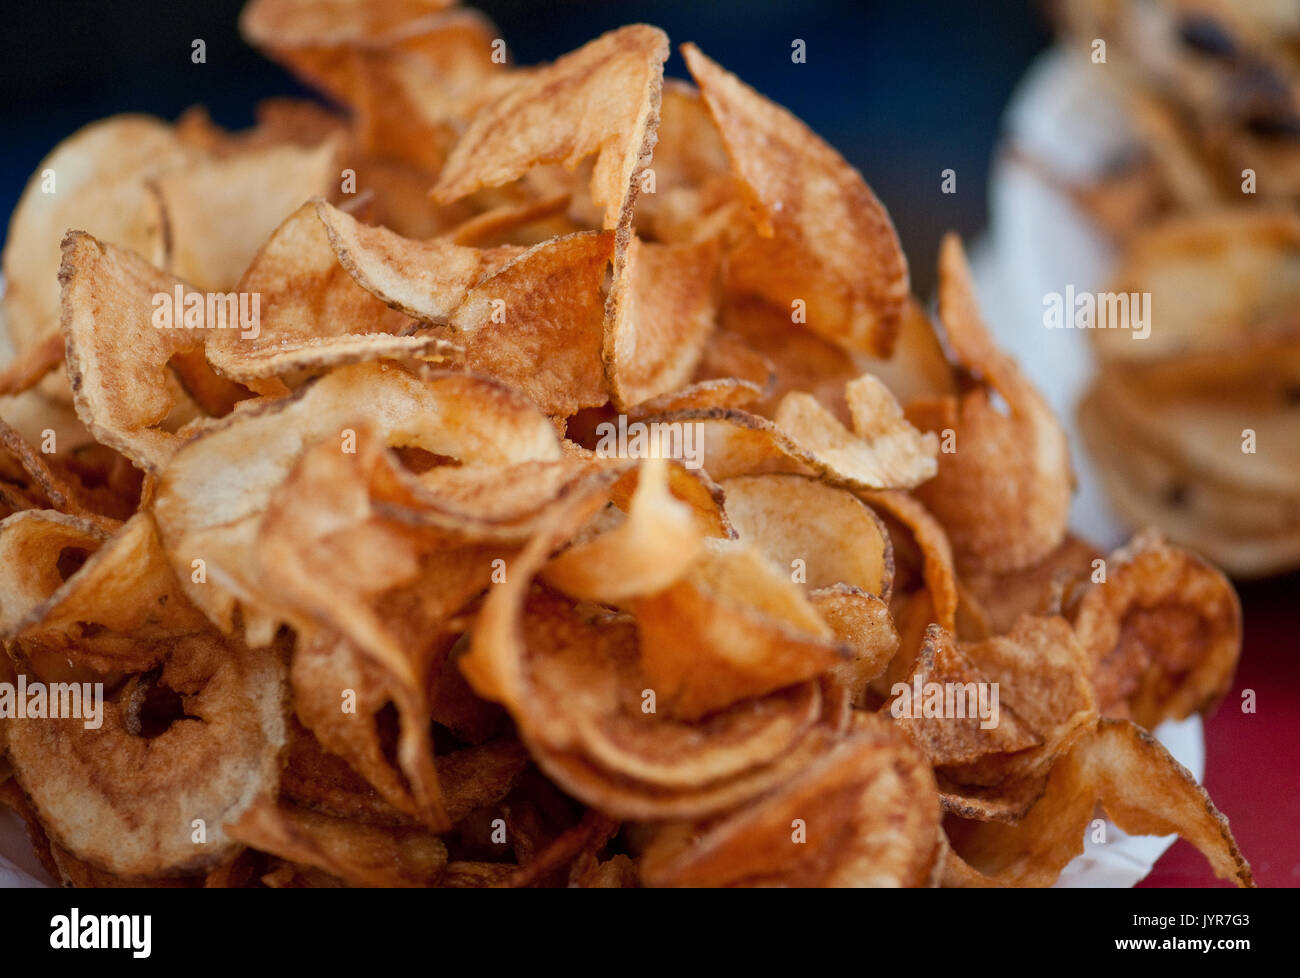 Closeup of hot deep fried potato chips from the festival Stock Photo - Alamy